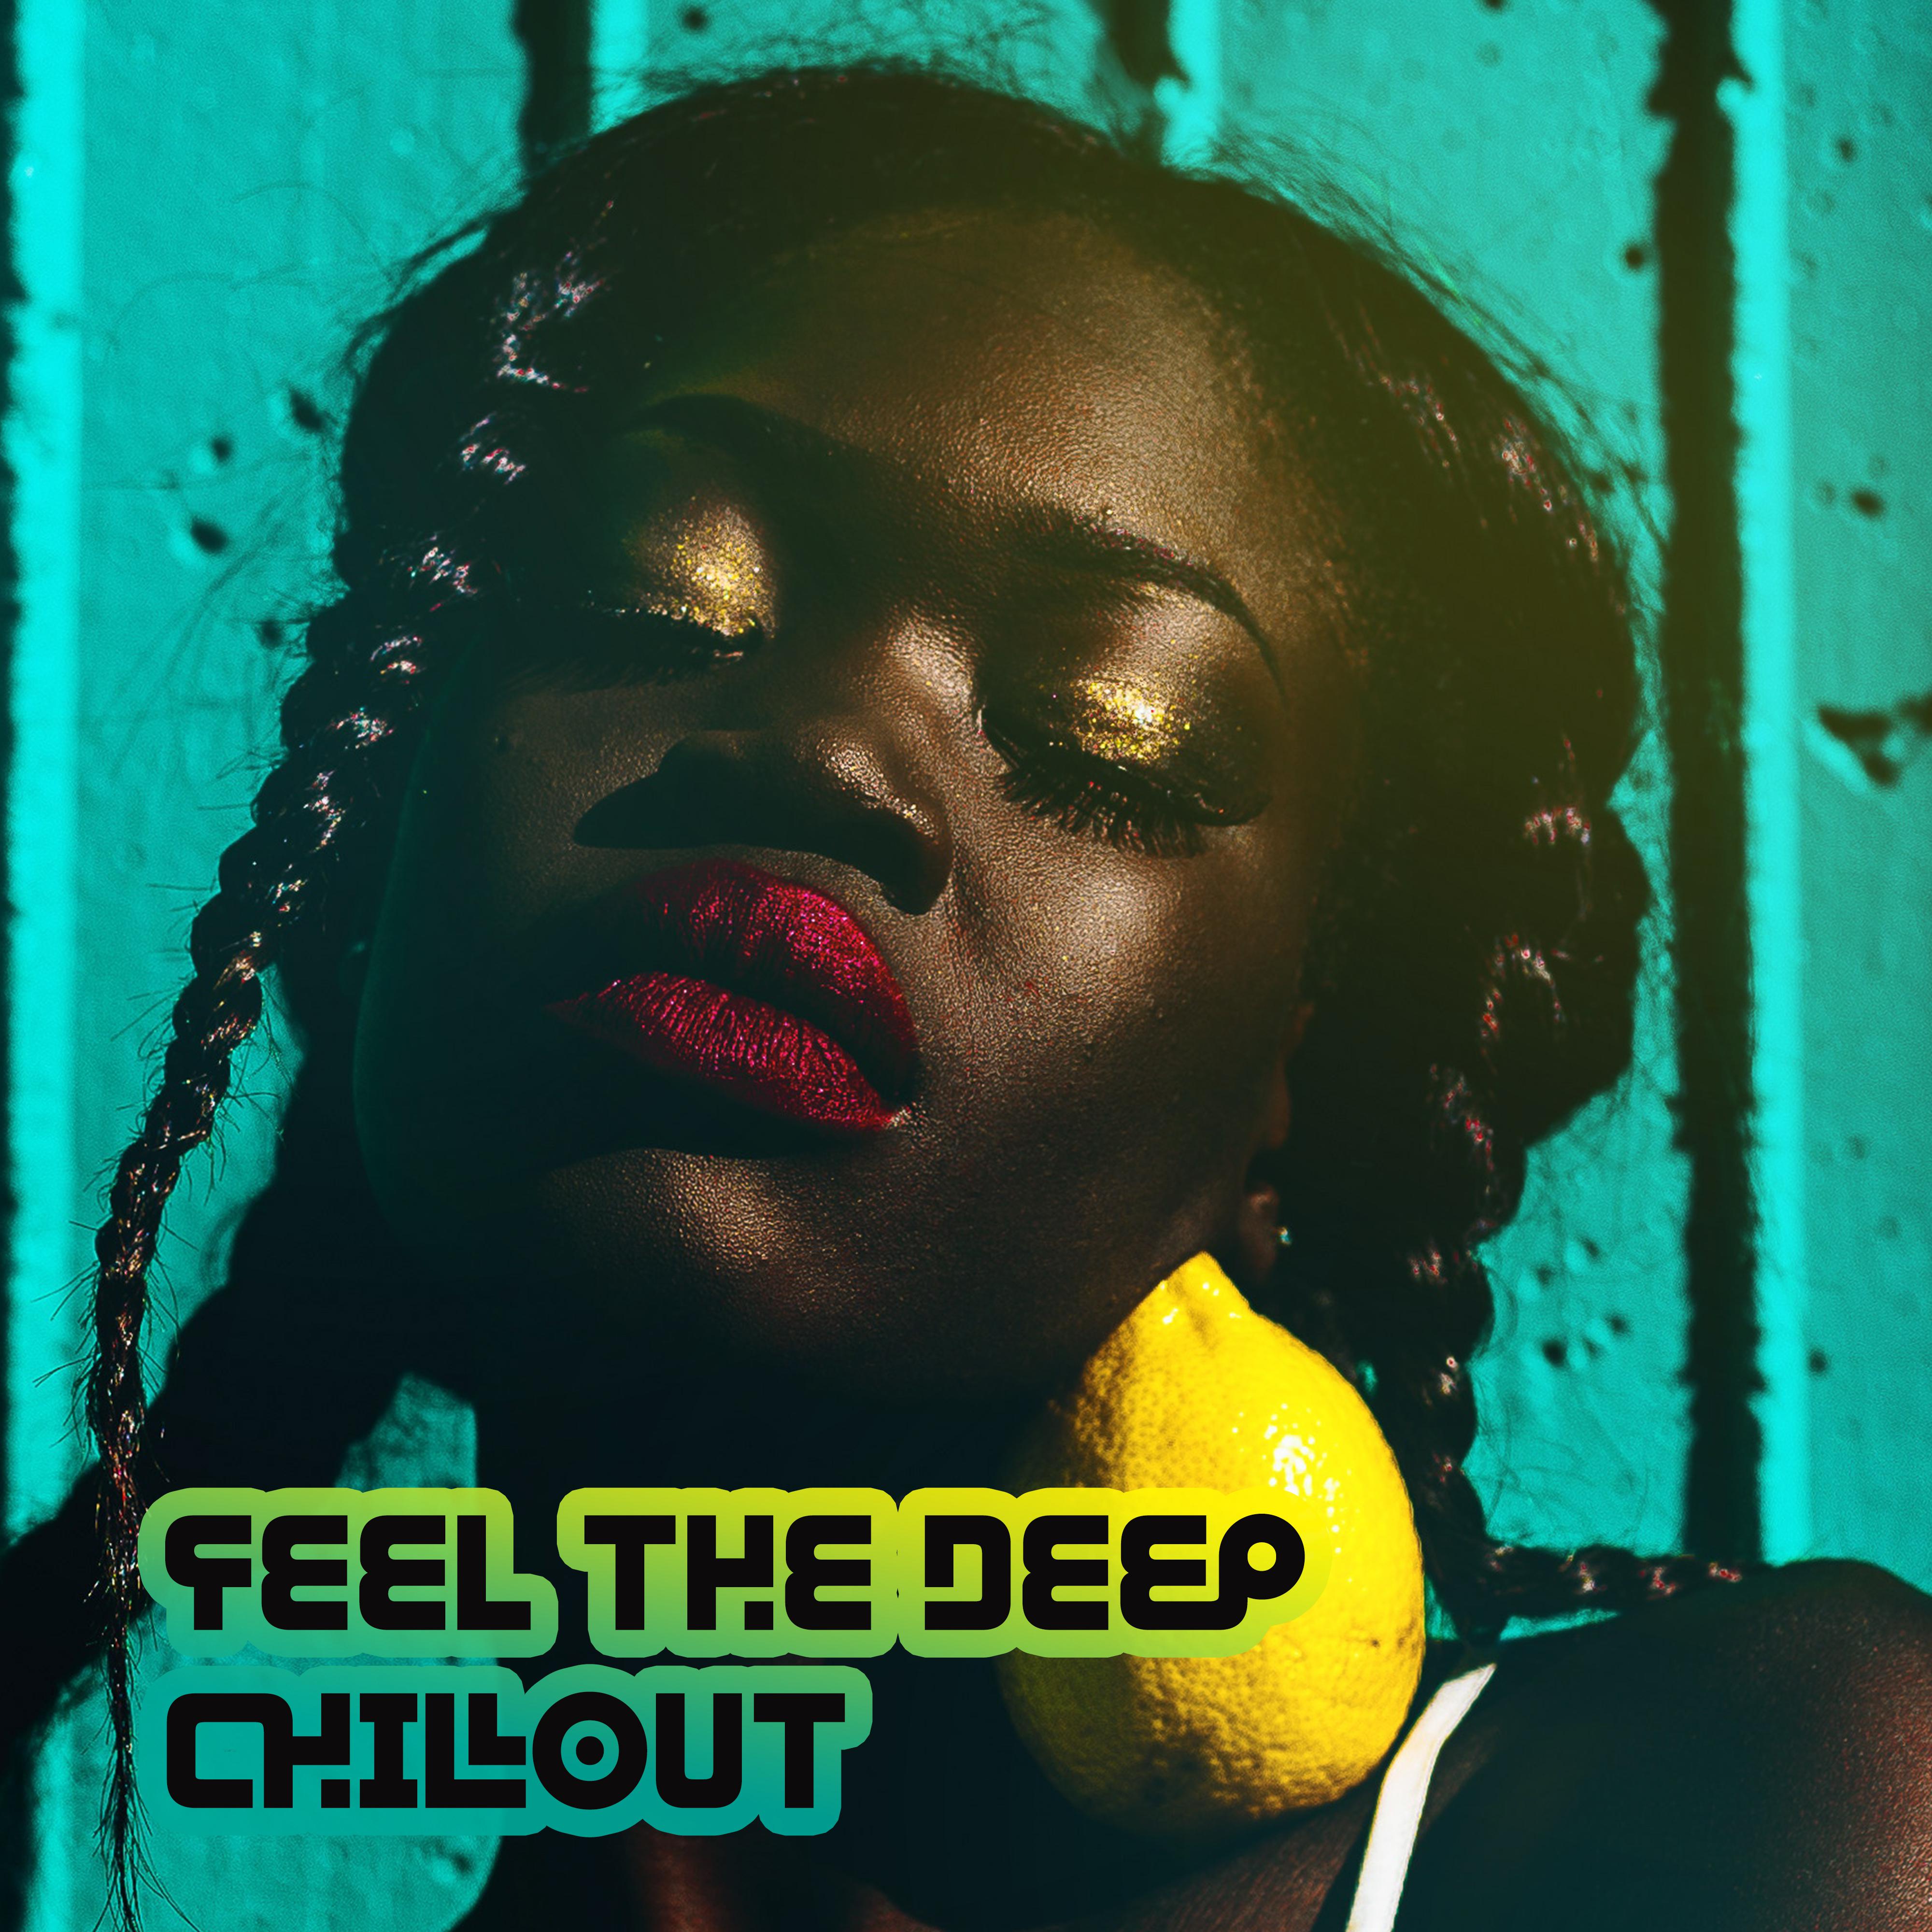 Feel the Deep Chillout: Essential Set for Home Relaxation, Moments of Blissful Rest and Respite from Everyday Duties